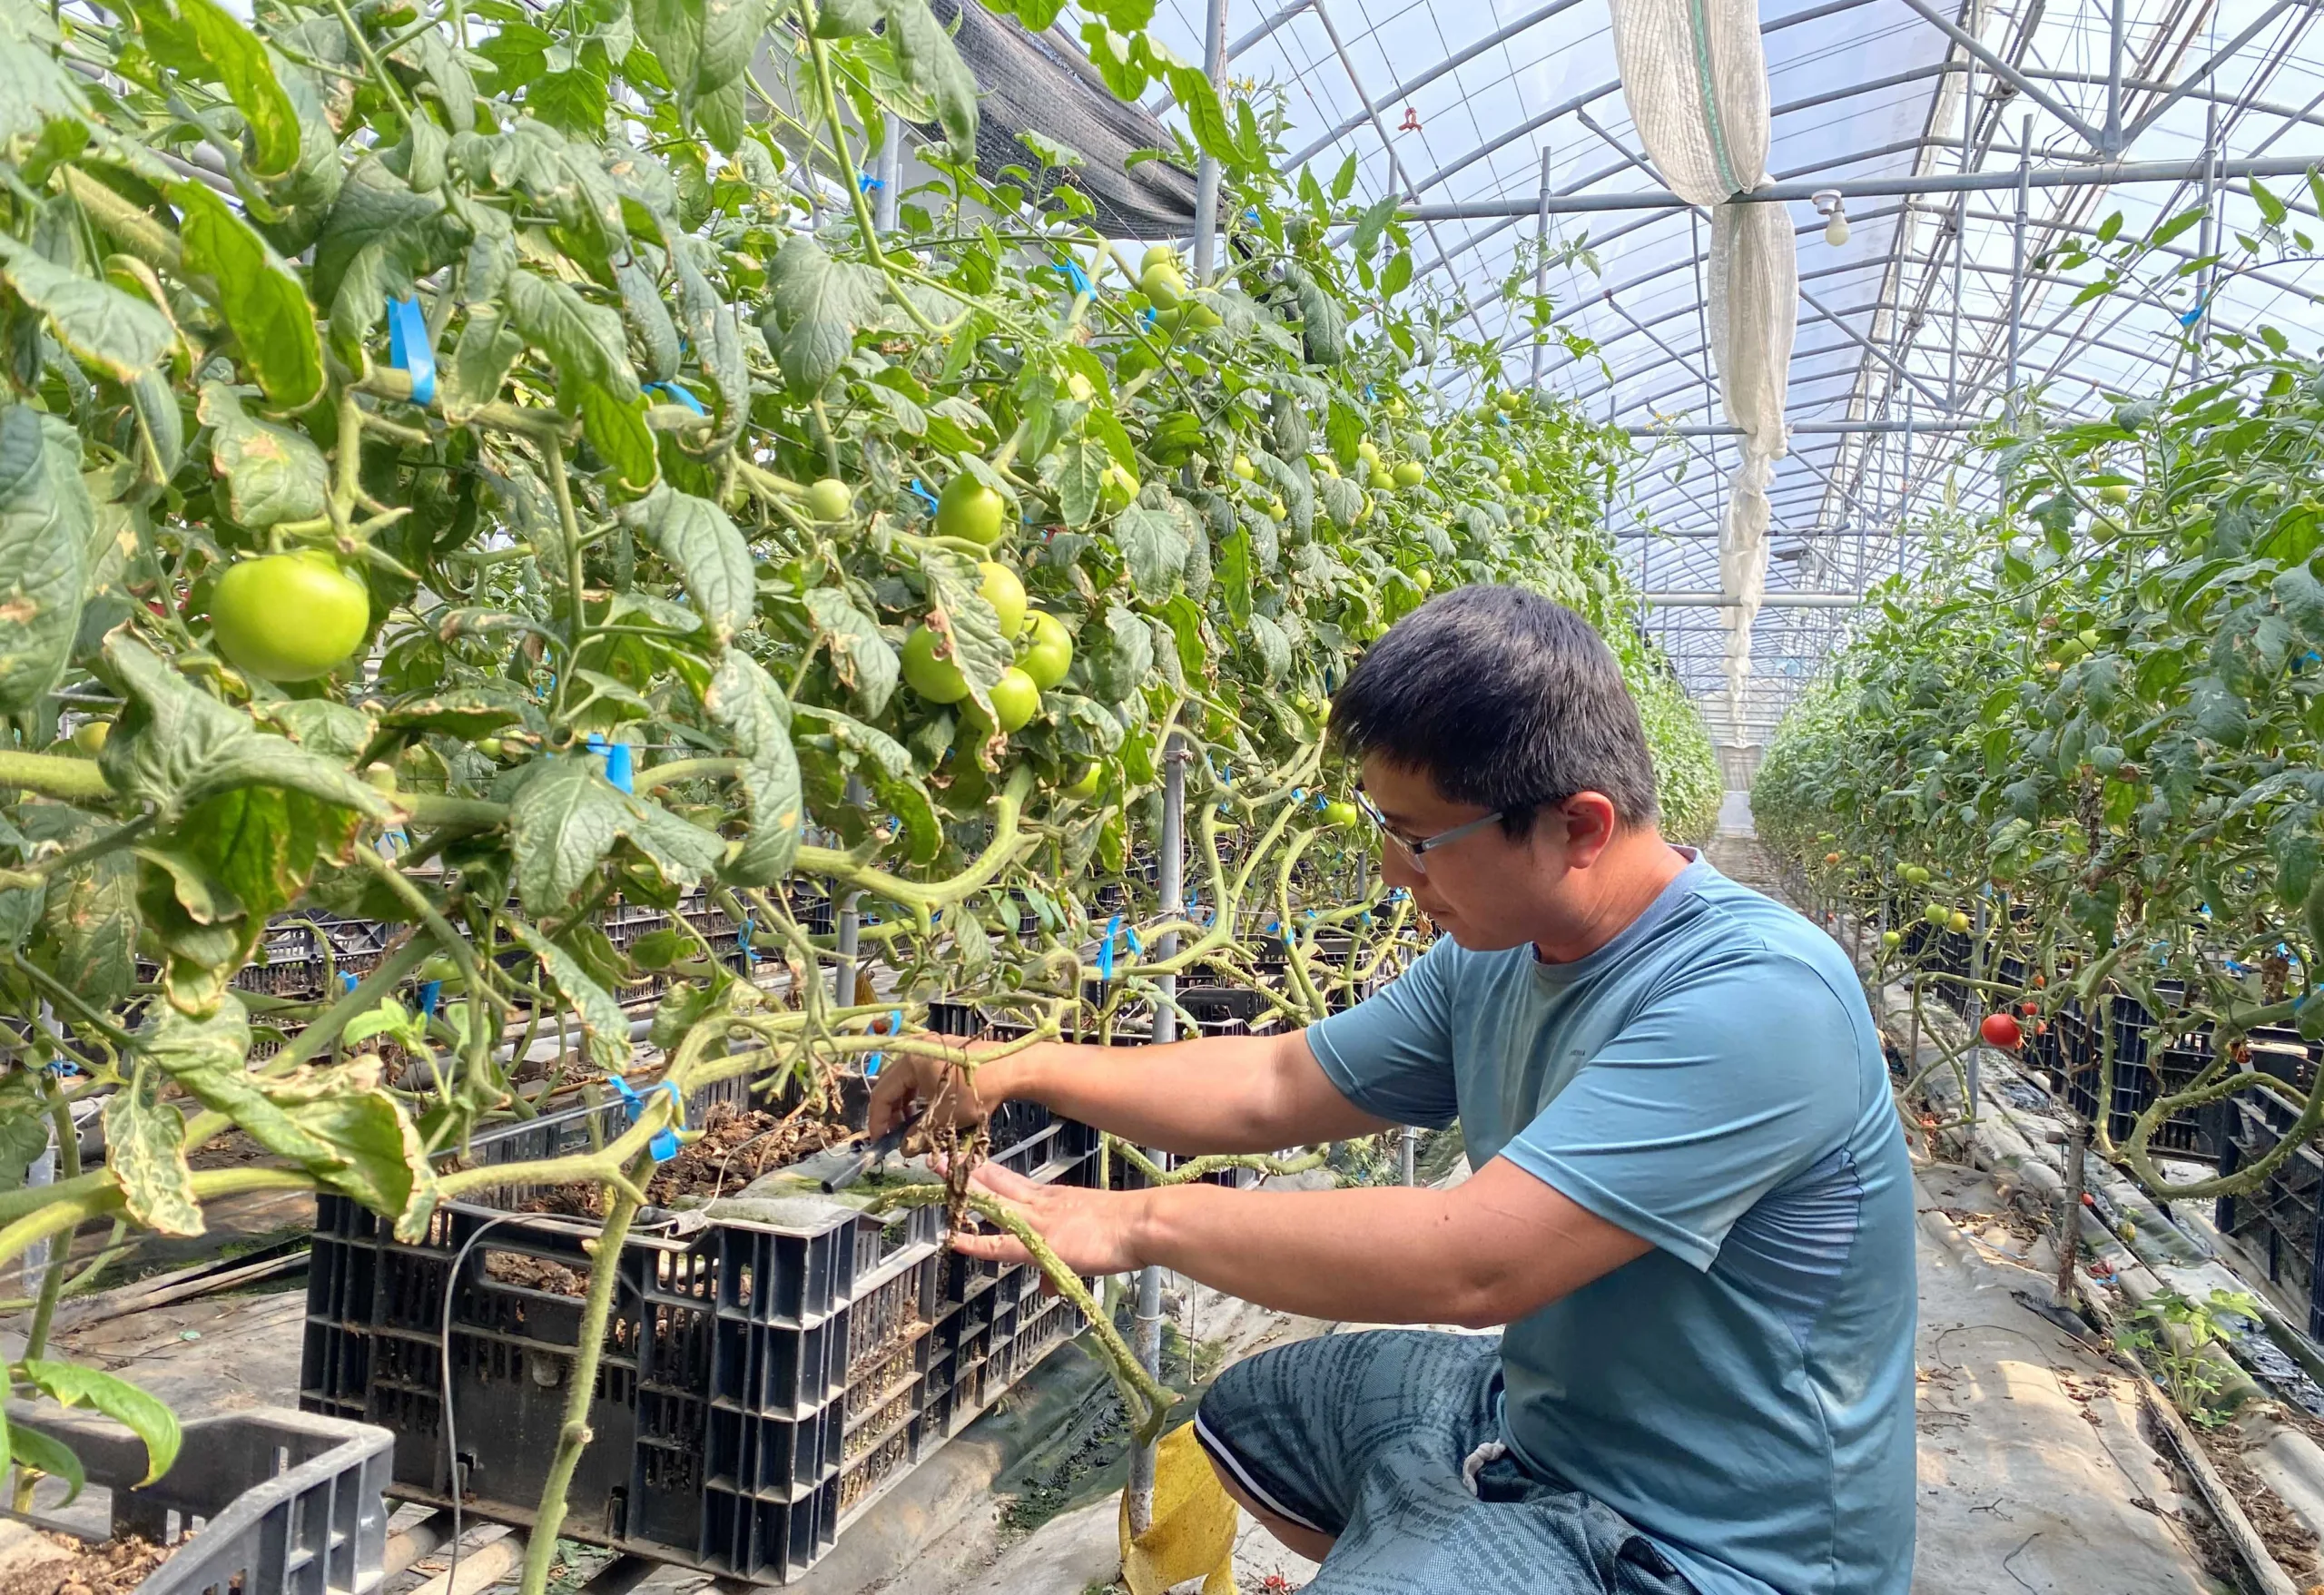 Taiwan’s New Era of Agriculture: High-tech Farmers on the Rise